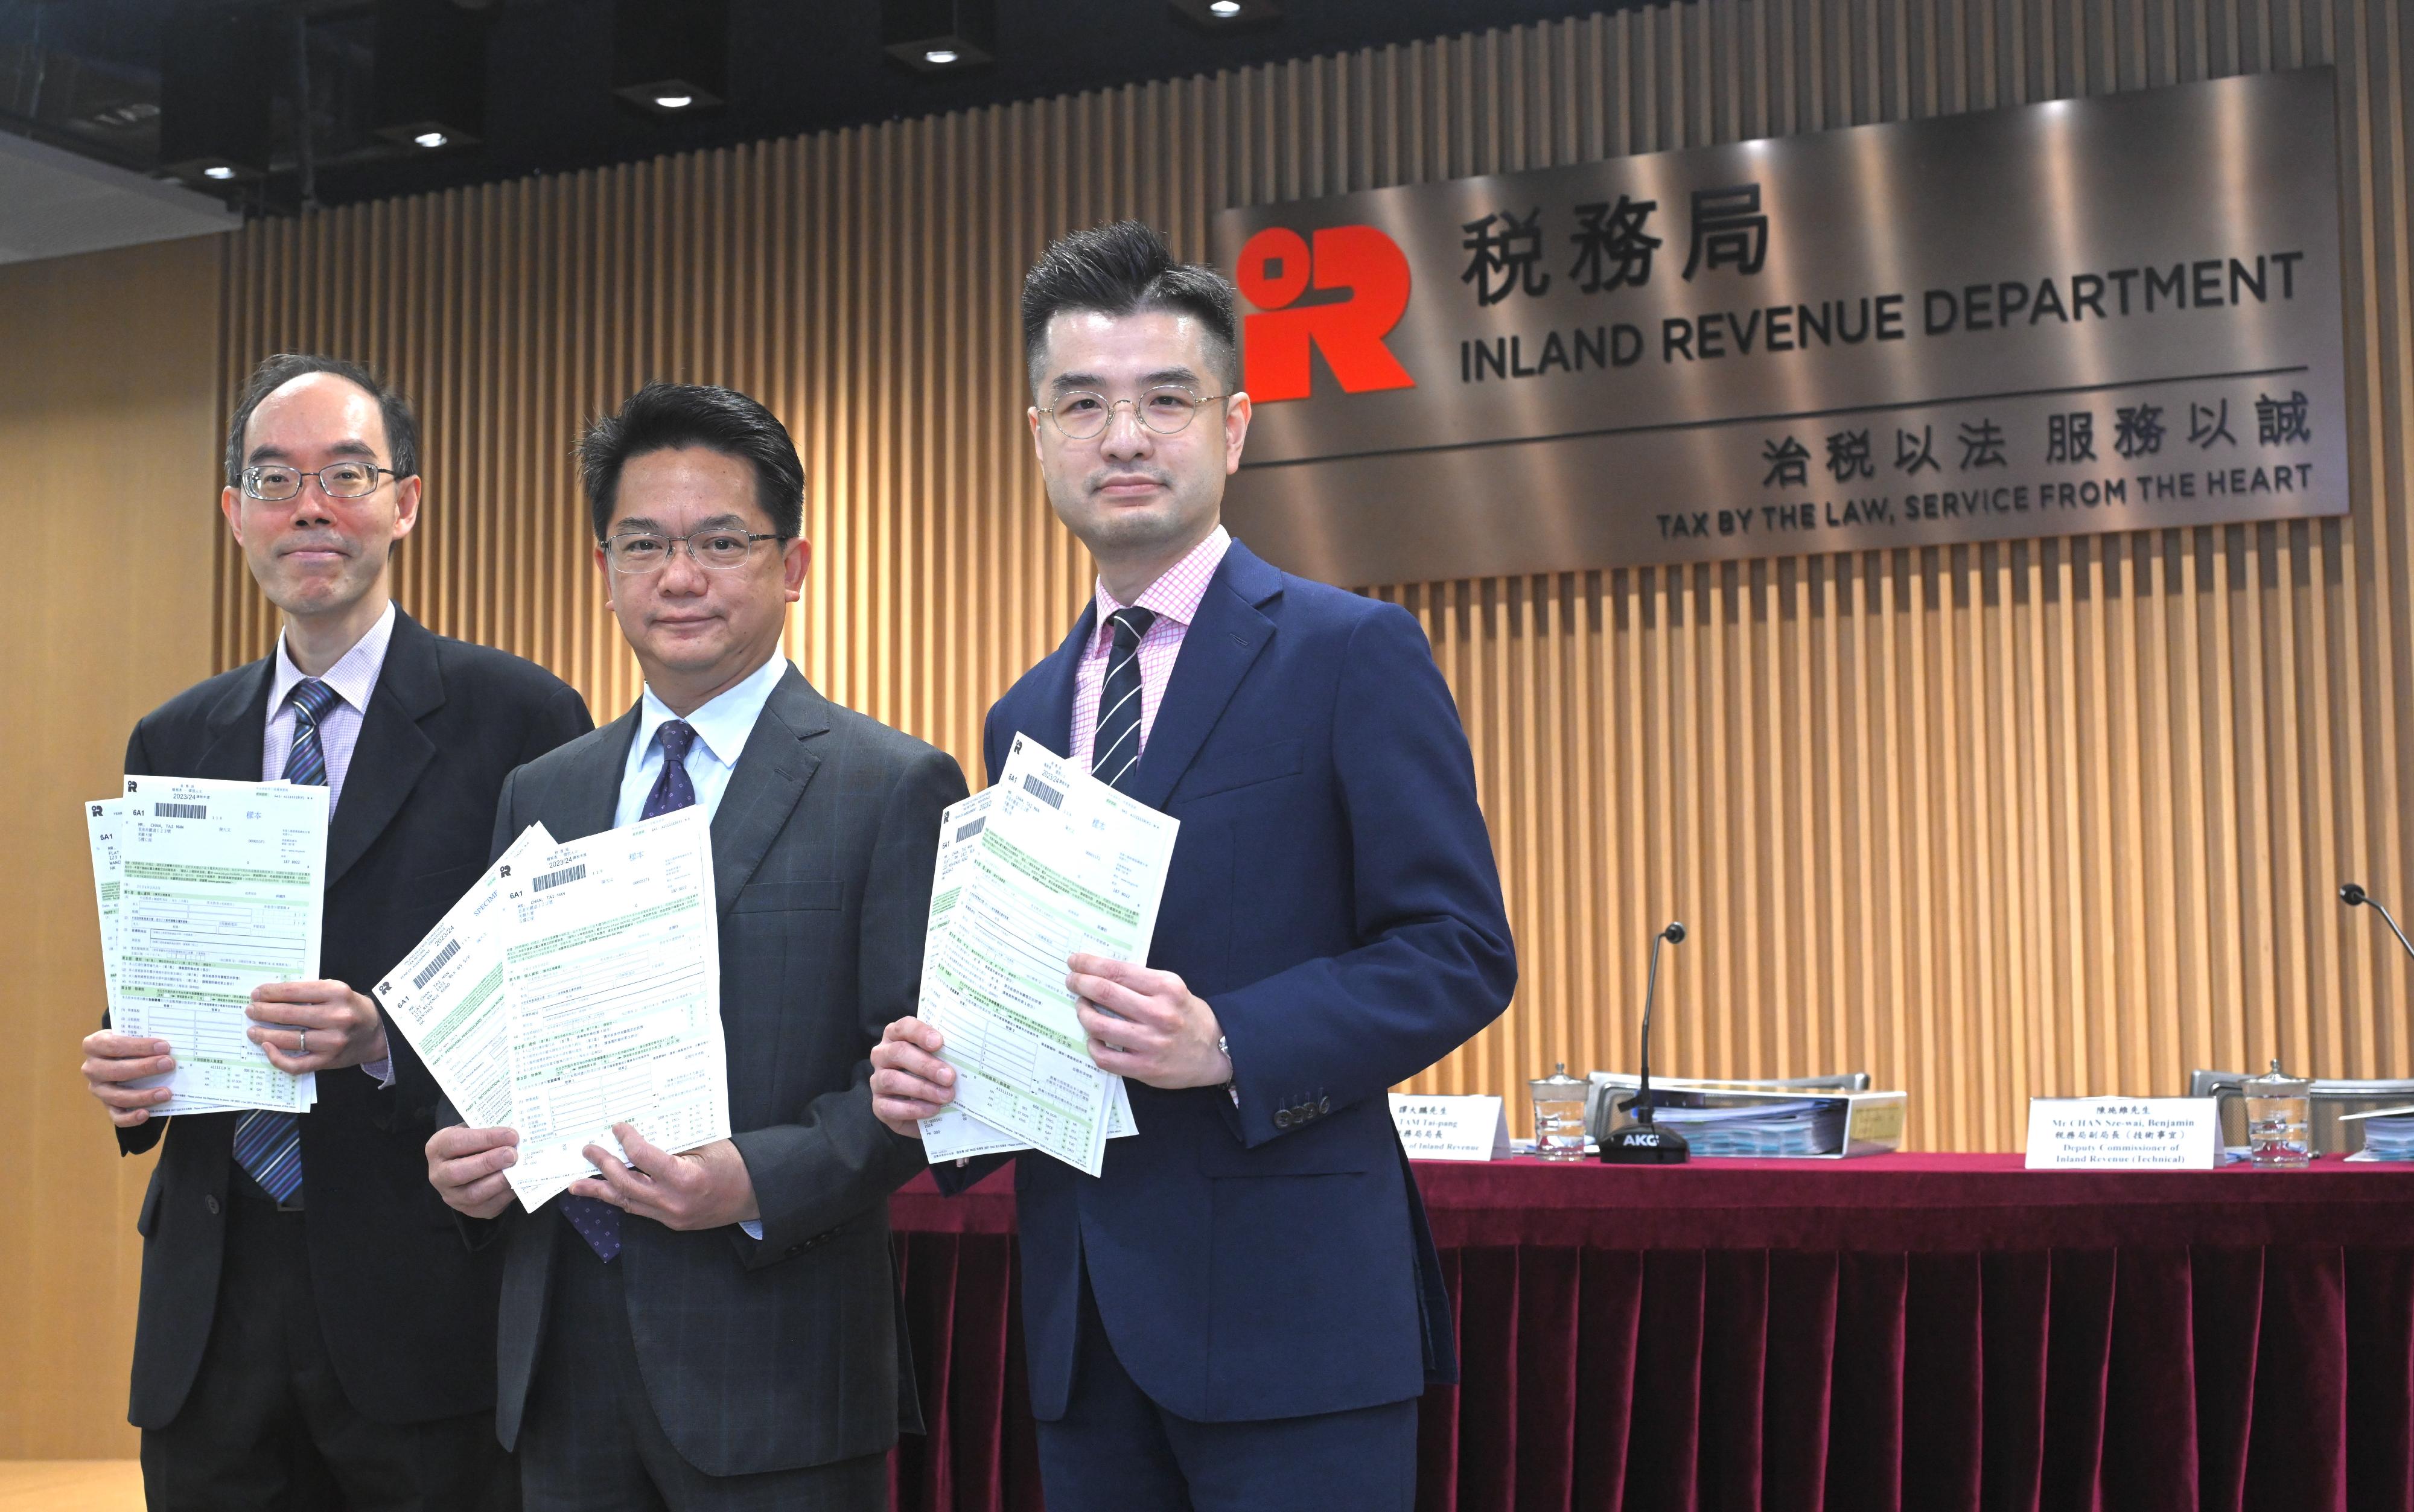 The Commissioner of Inland Revenue, Mr Tam Tai-pang (centre), today (May 2) hosted a press conference on the completion of tax returns for individuals for the year of assessment 2023/24 and the tax collection of 2023-24, and also introduced new features of e-filing of profits tax returns. Also in attendance are the Deputy Commissioner of Inland Revenue (Operations), Mr Leung Kin-wa (left), and the Deputy Commissioner of Inland Revenue (Technical), Mr Benjamin Chan (right).